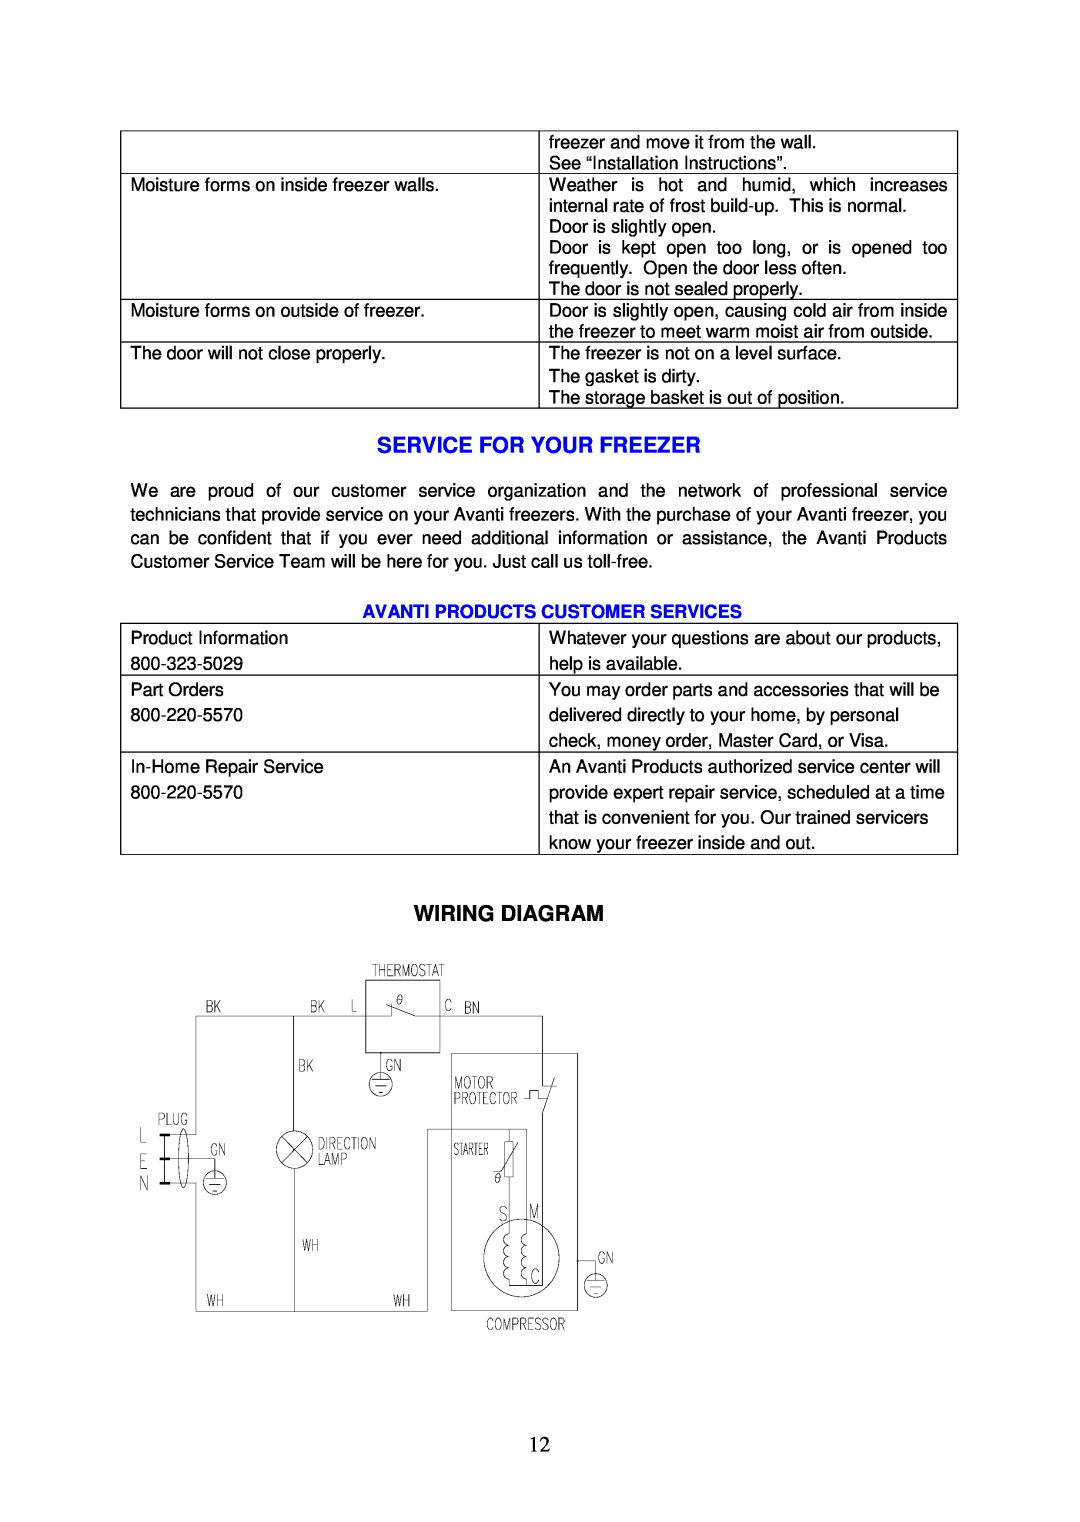 Avanti CF146 instruction manual Service For Your Freezer, Wiring Diagram, Avanti Products Customer Services 